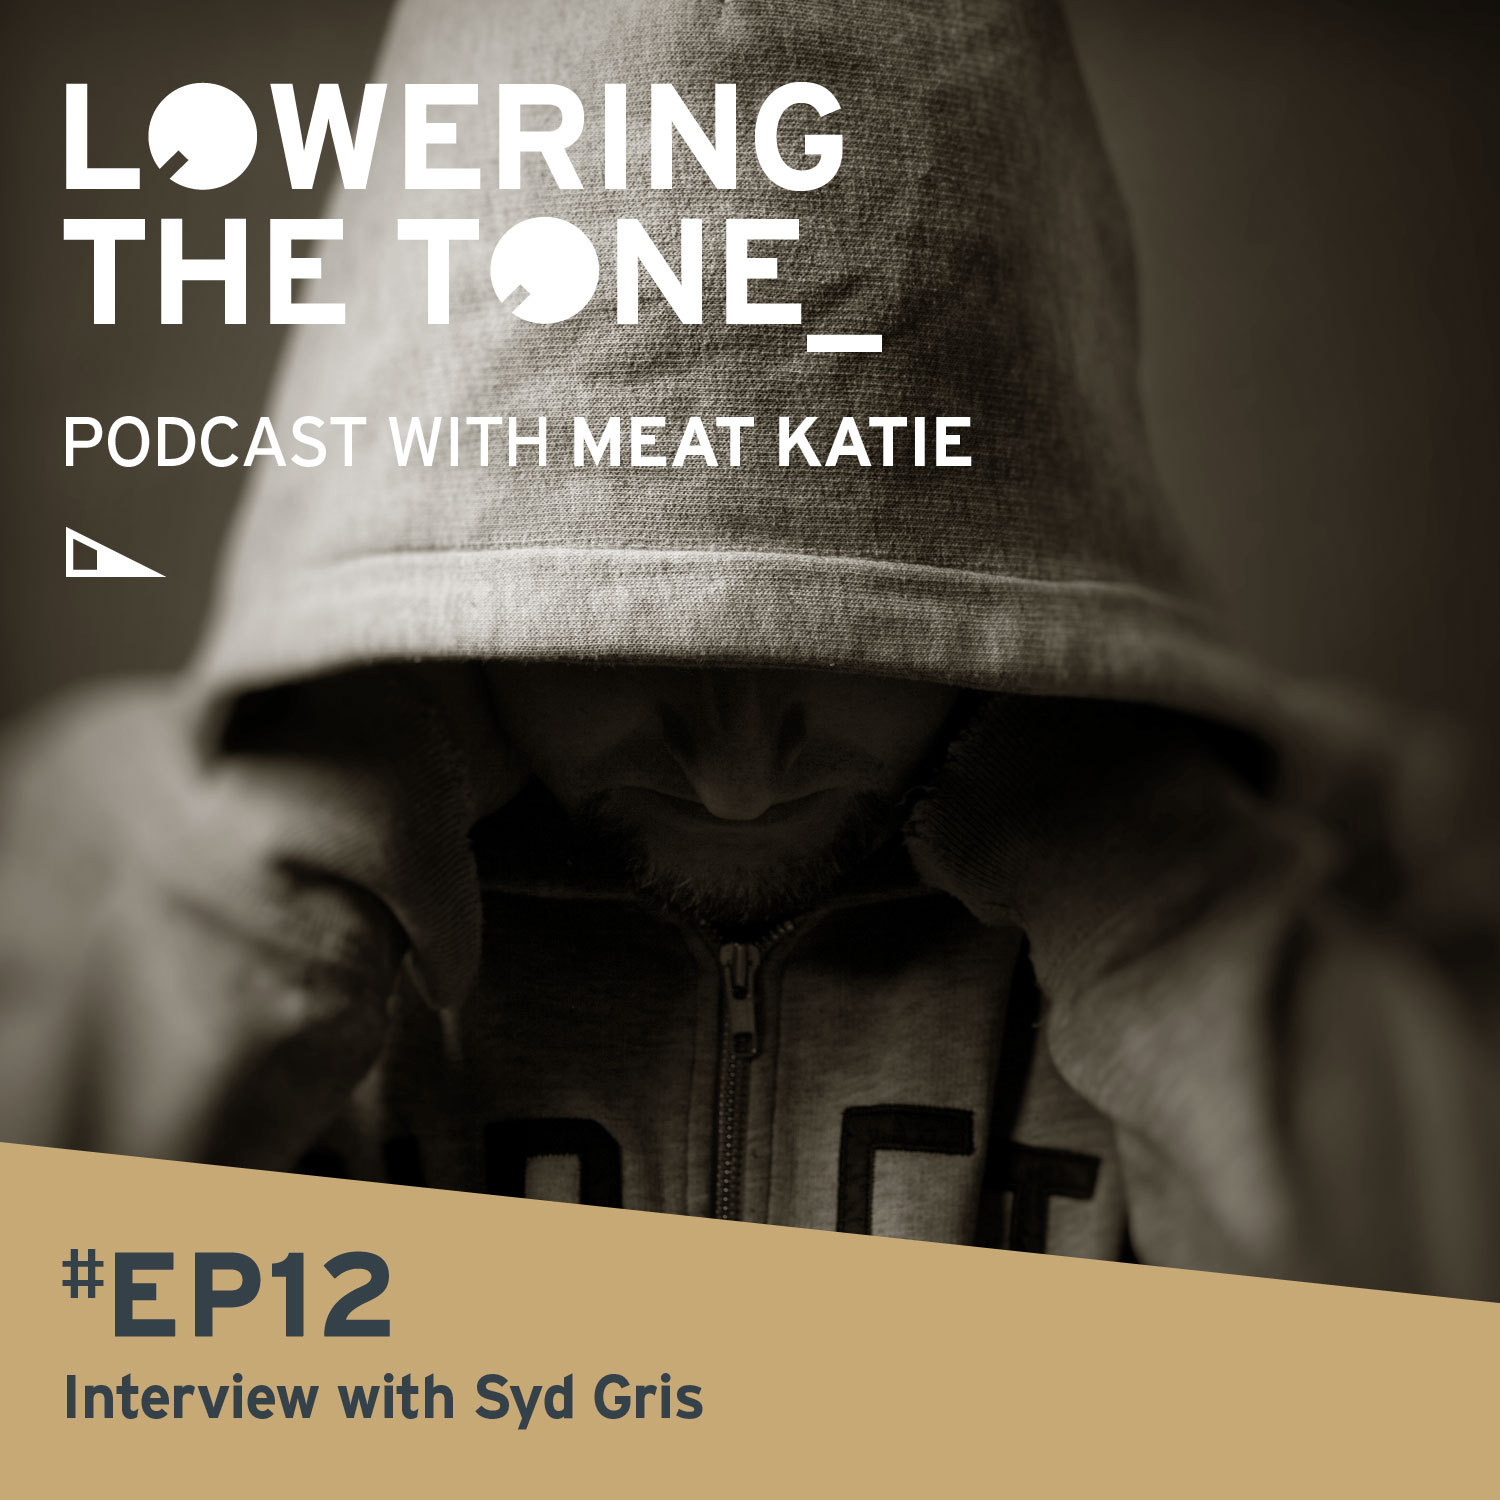 Meat Katie 'Lowering The Tone' Episode 12 - (Interview with Syd Gris)